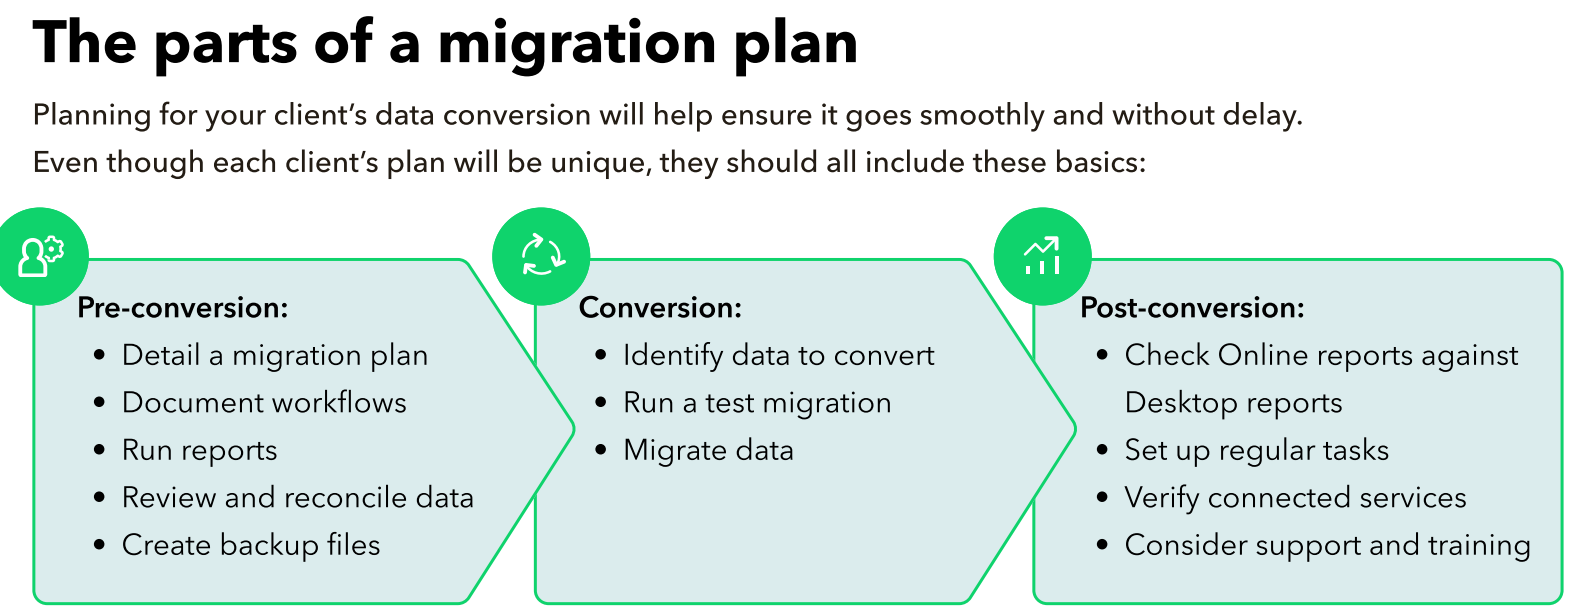 A diagram of a migration plan

Description automatically generated